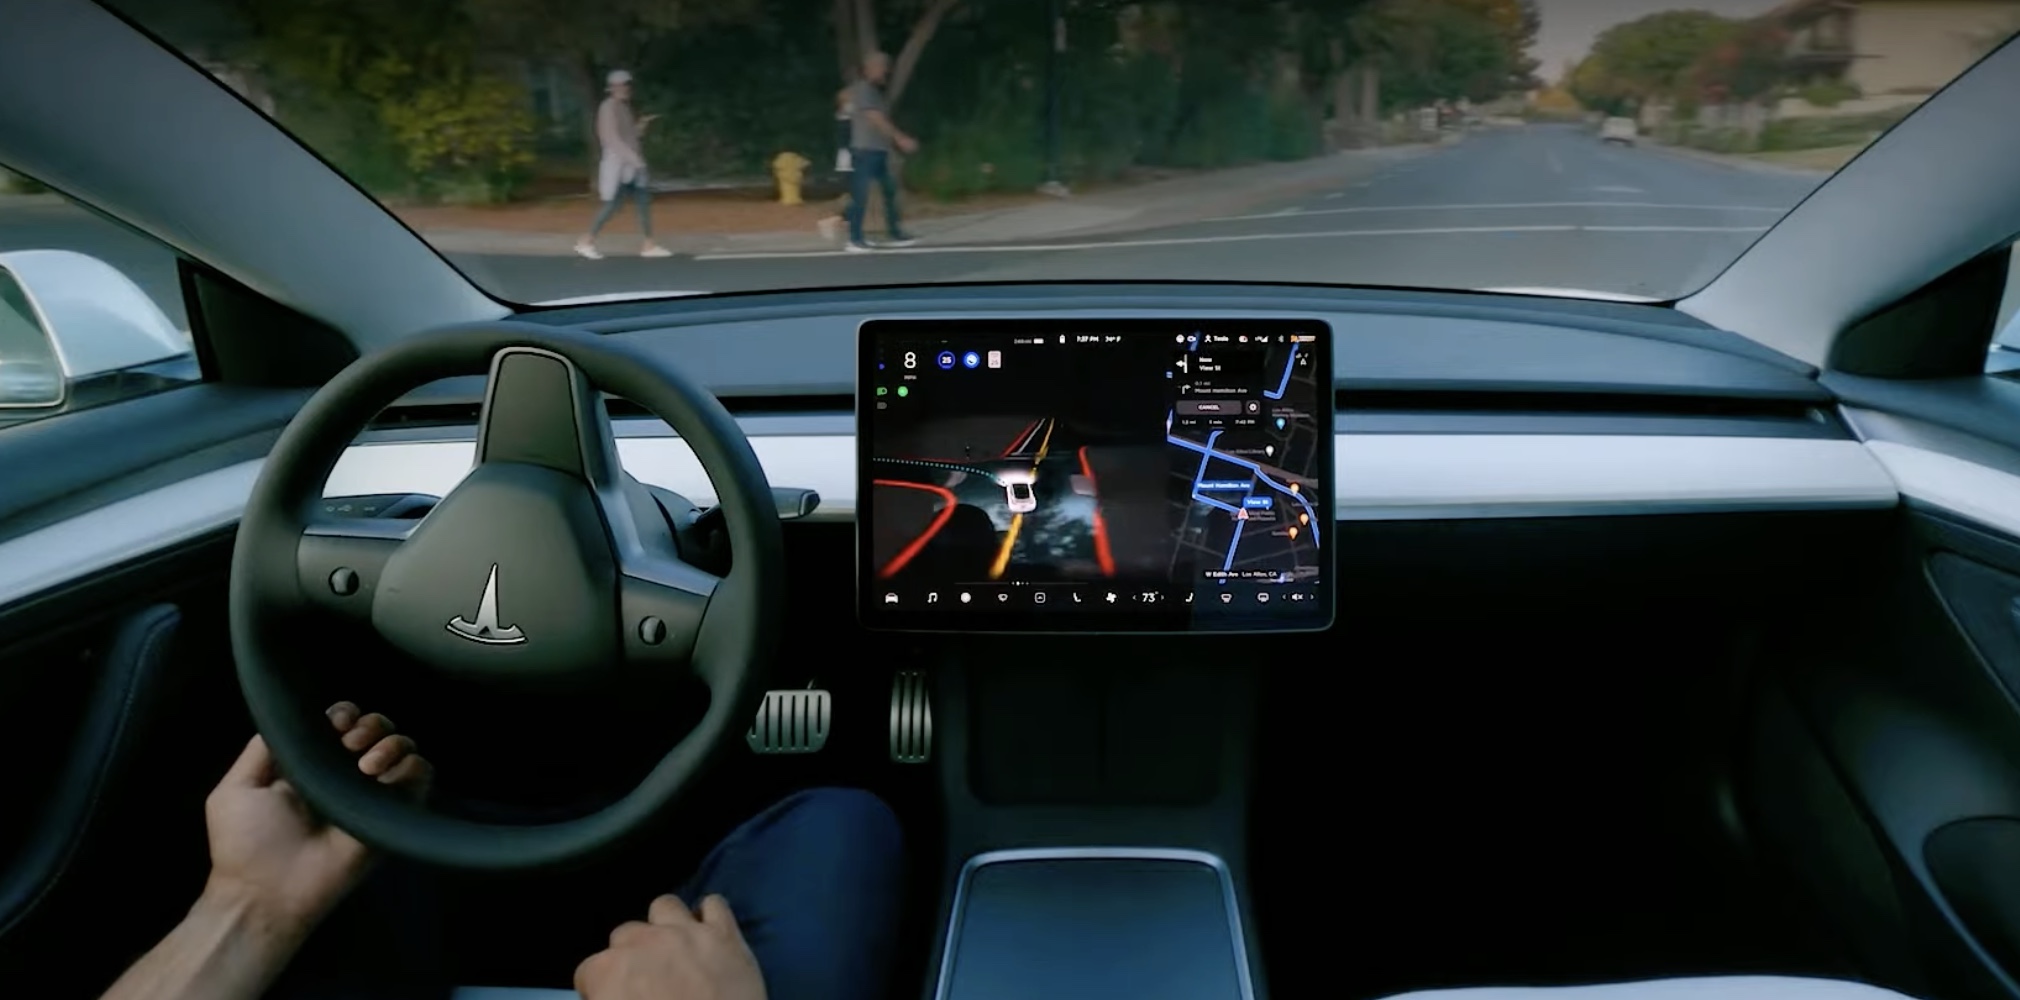 Tesla is in talks with 'one major automaker about licensing Full Self-Driving'